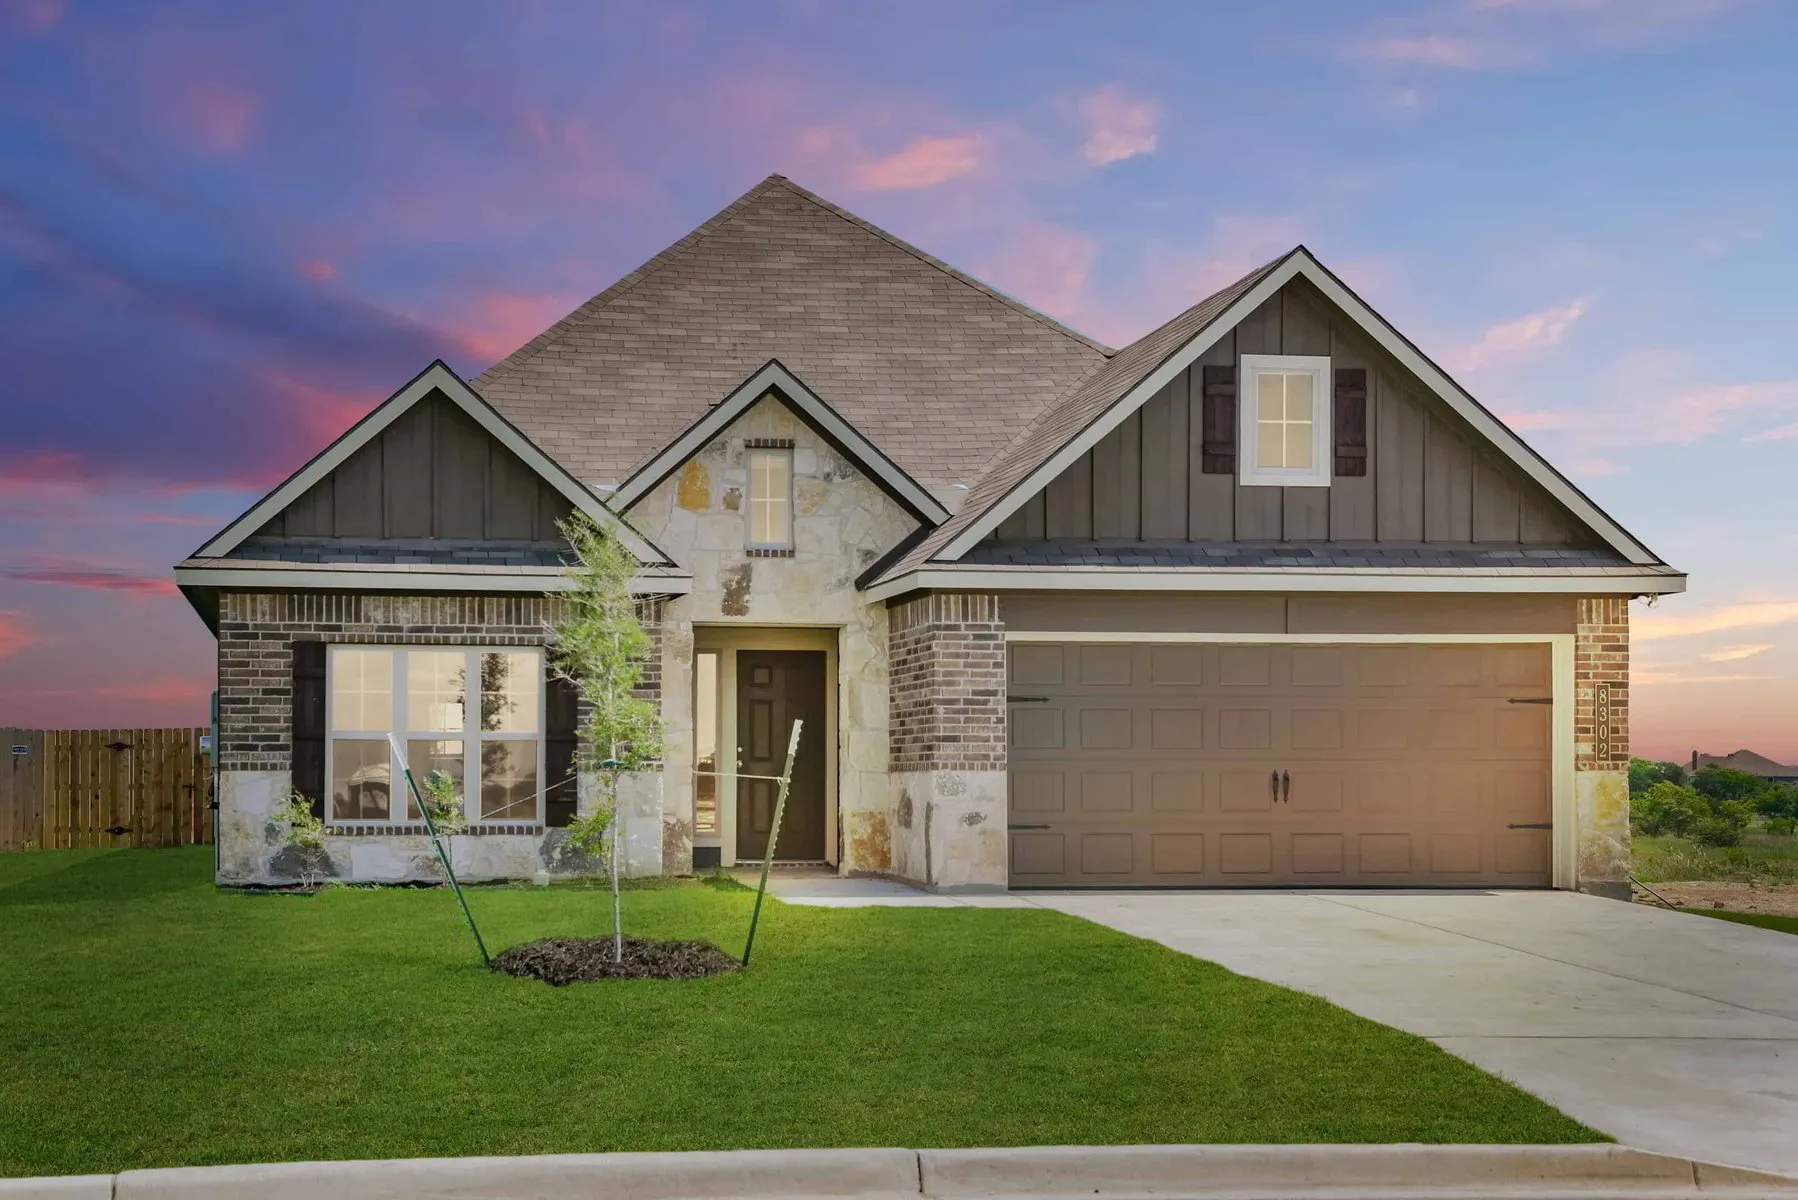 This is a Stylecraft Builders model home exterior image for their new homes in Southern Pointe near College Station, TX.